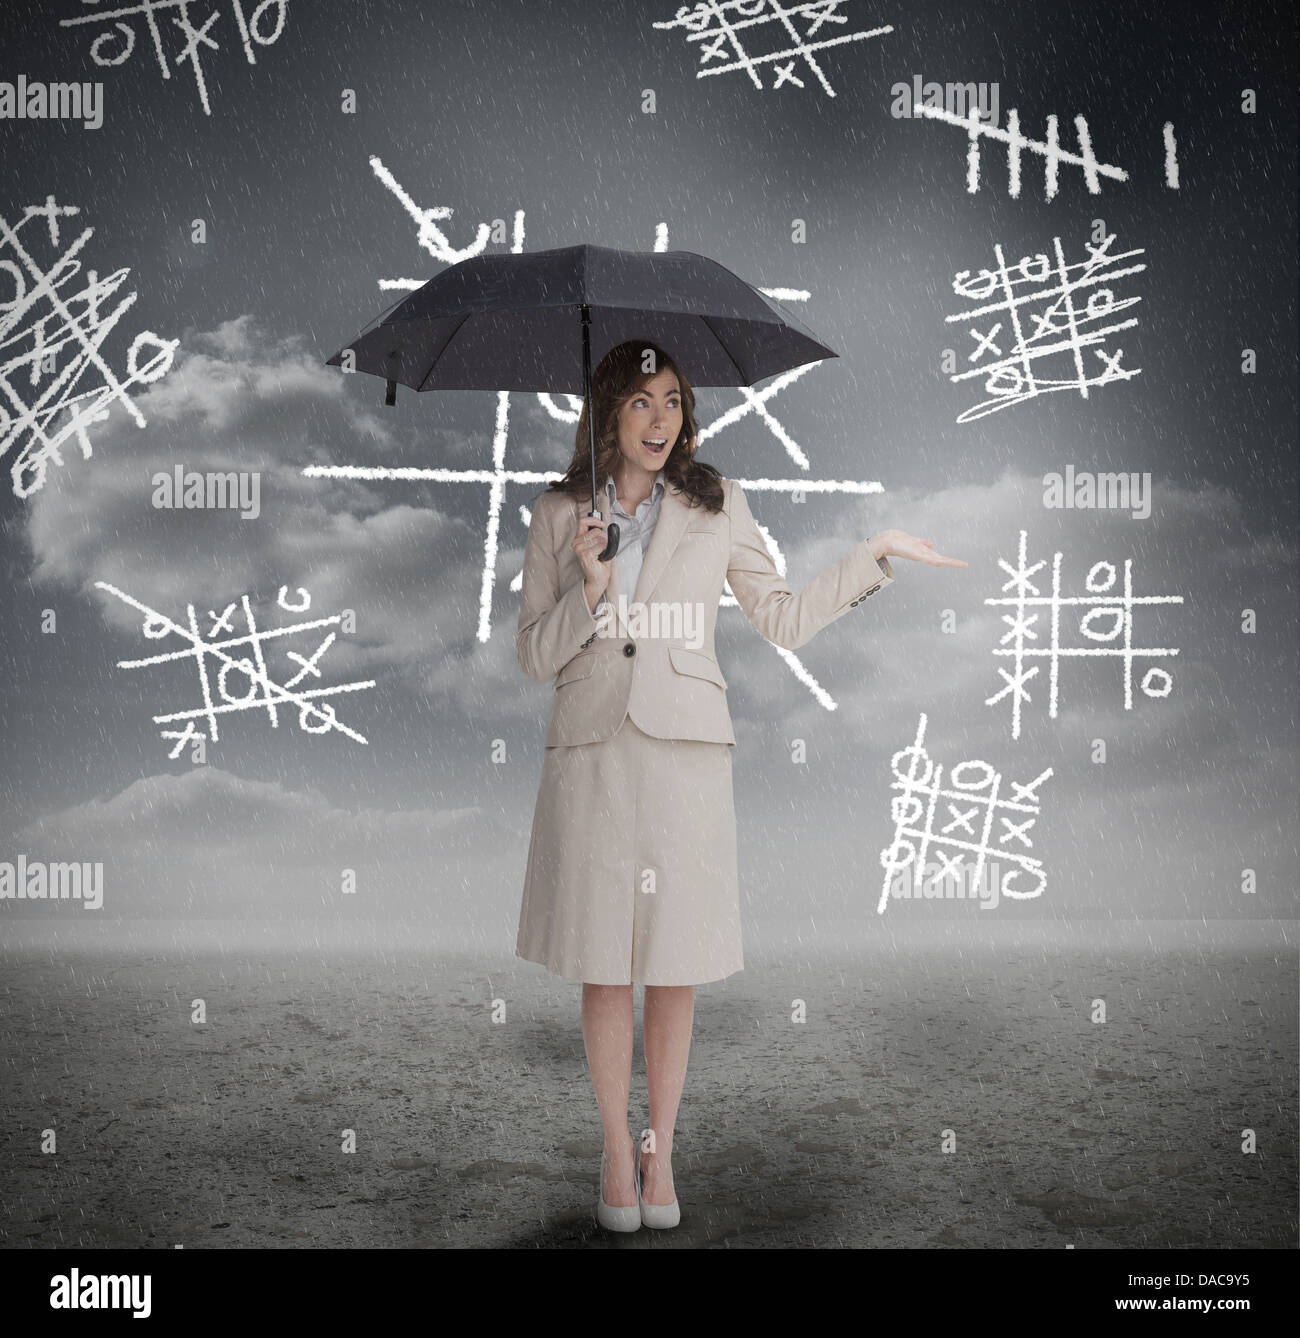 Businesswoman with noughts and crosses holding umbrella Stock Photo